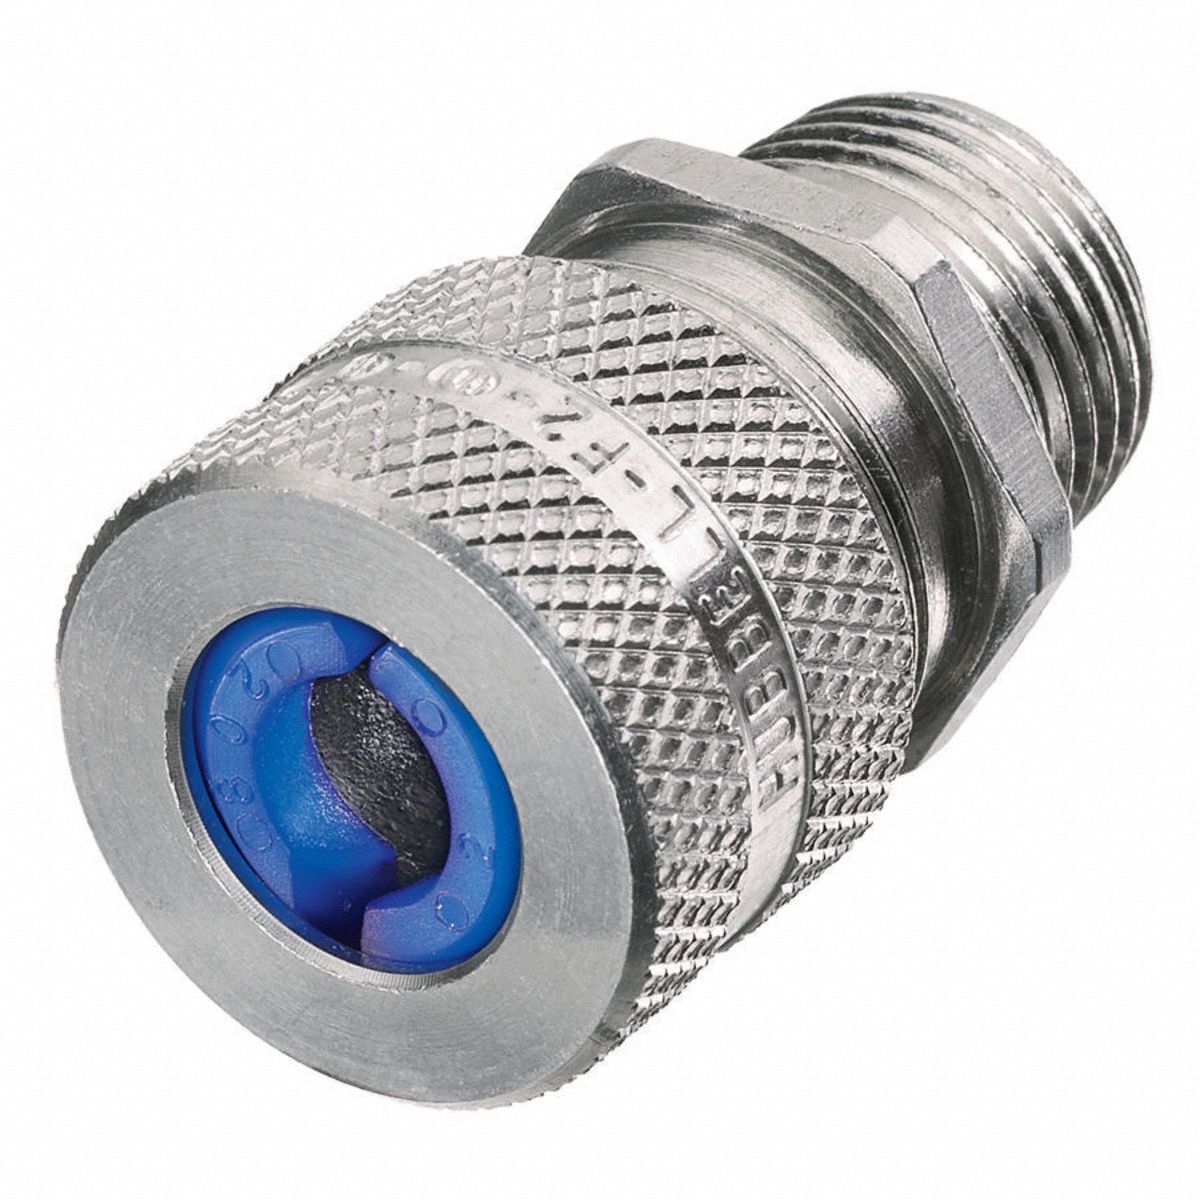 Hubbell SHC1018 Devices Conduit Cord Connector